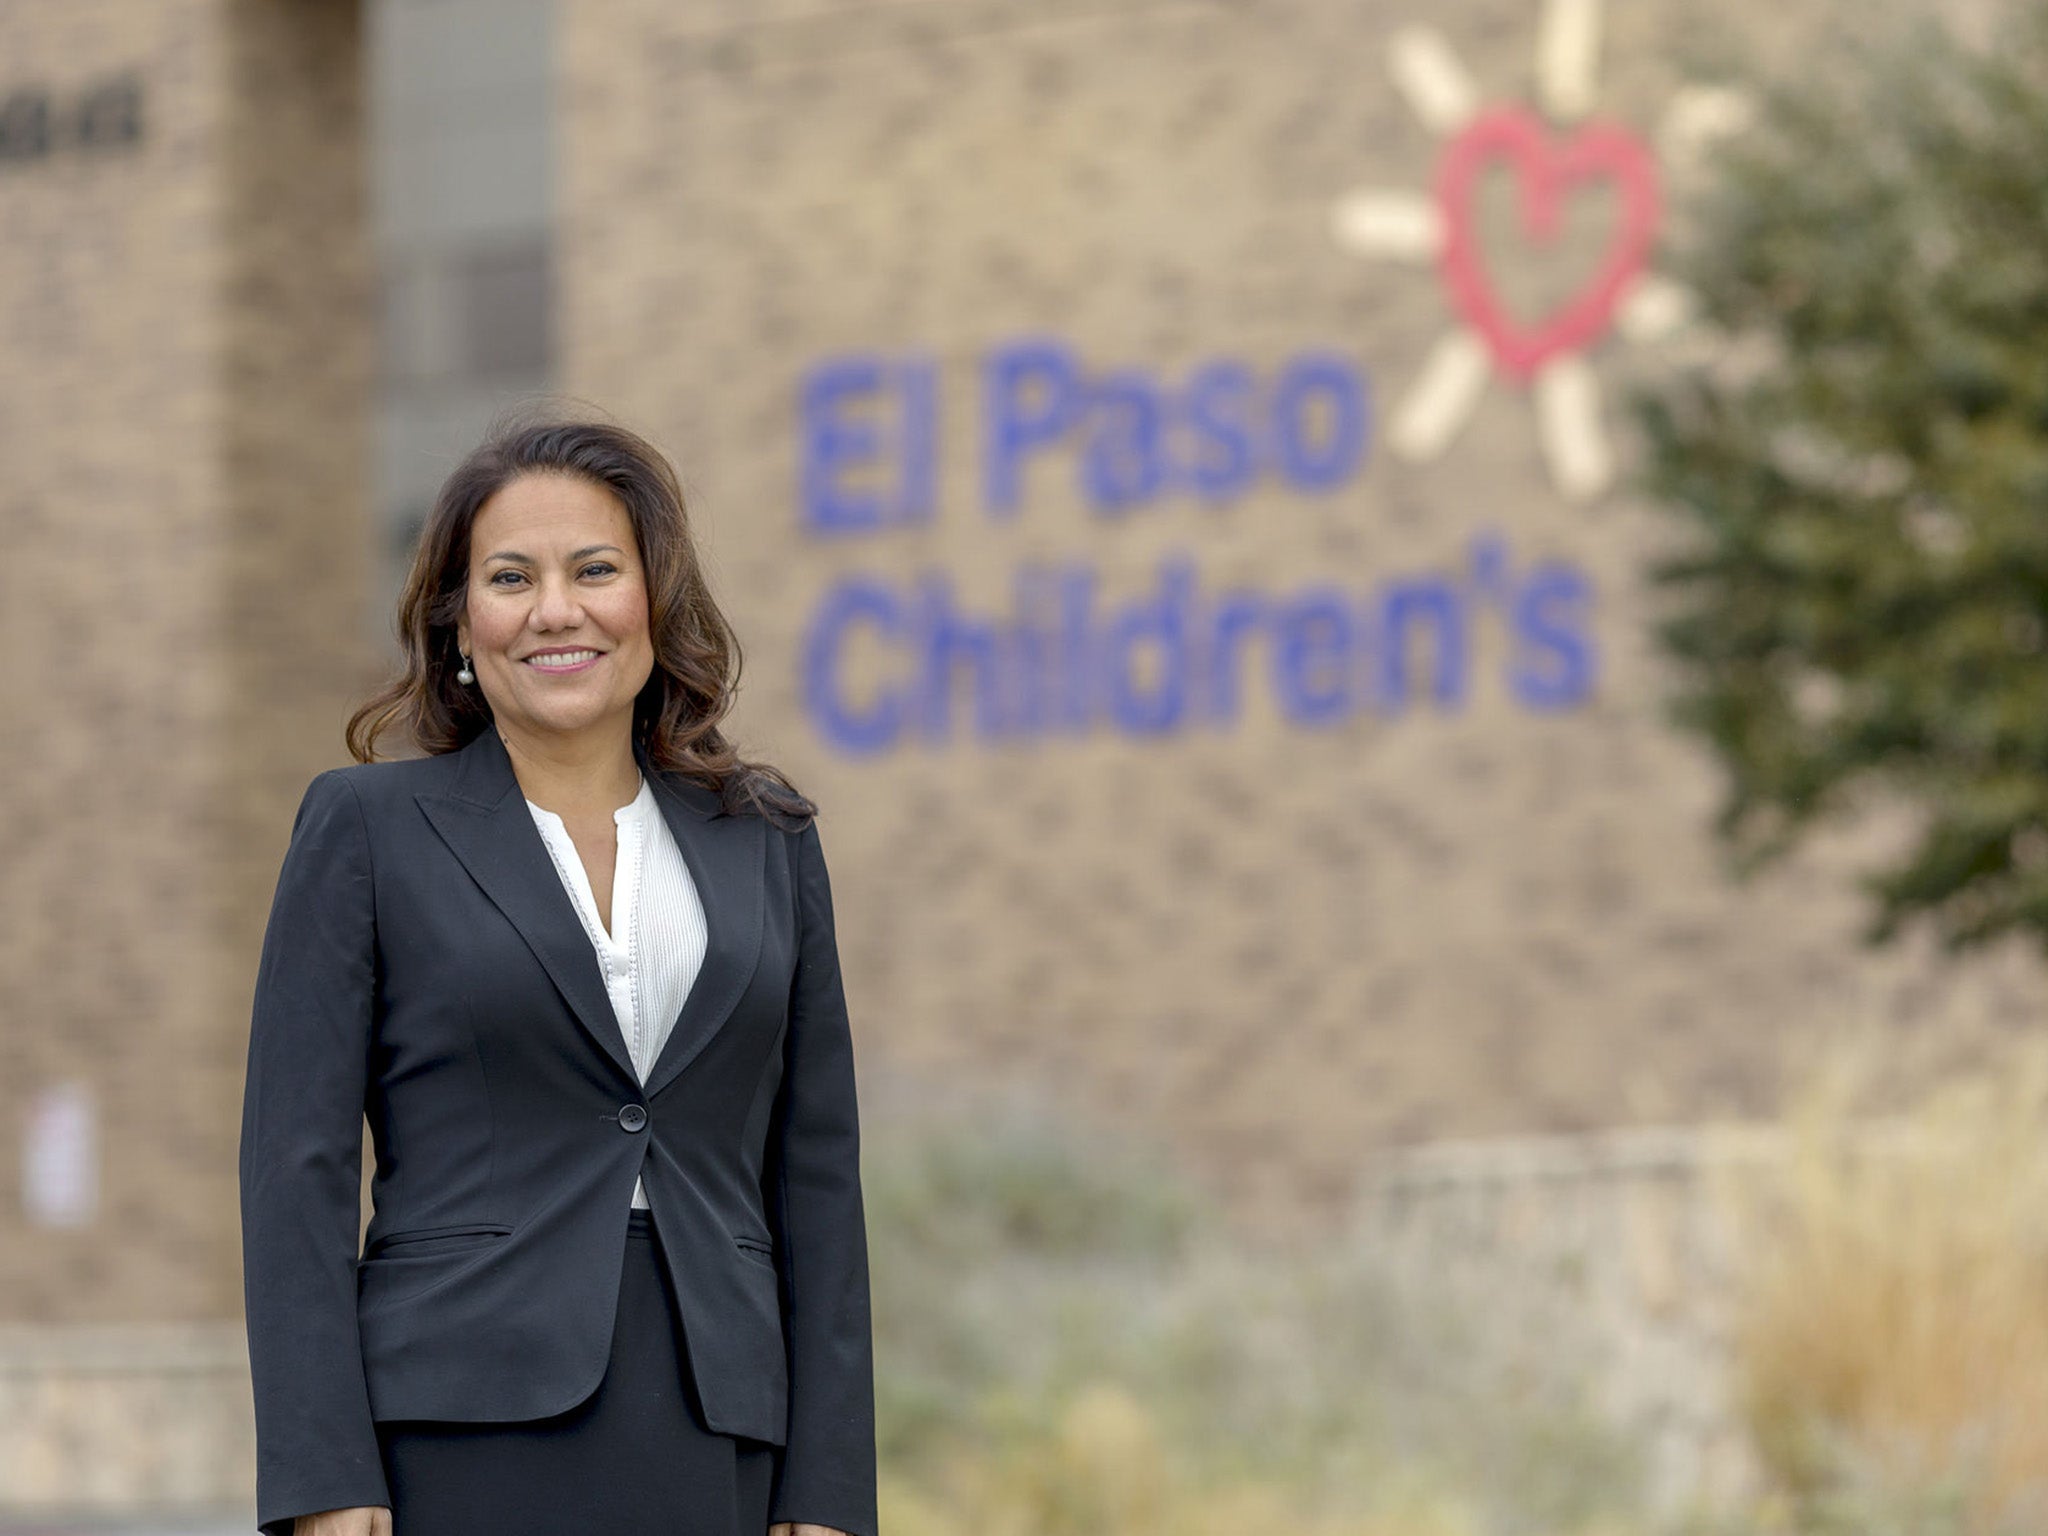 Veronica Escobar hopes to become the first Hispanic politician sent by Texas voters to Congress